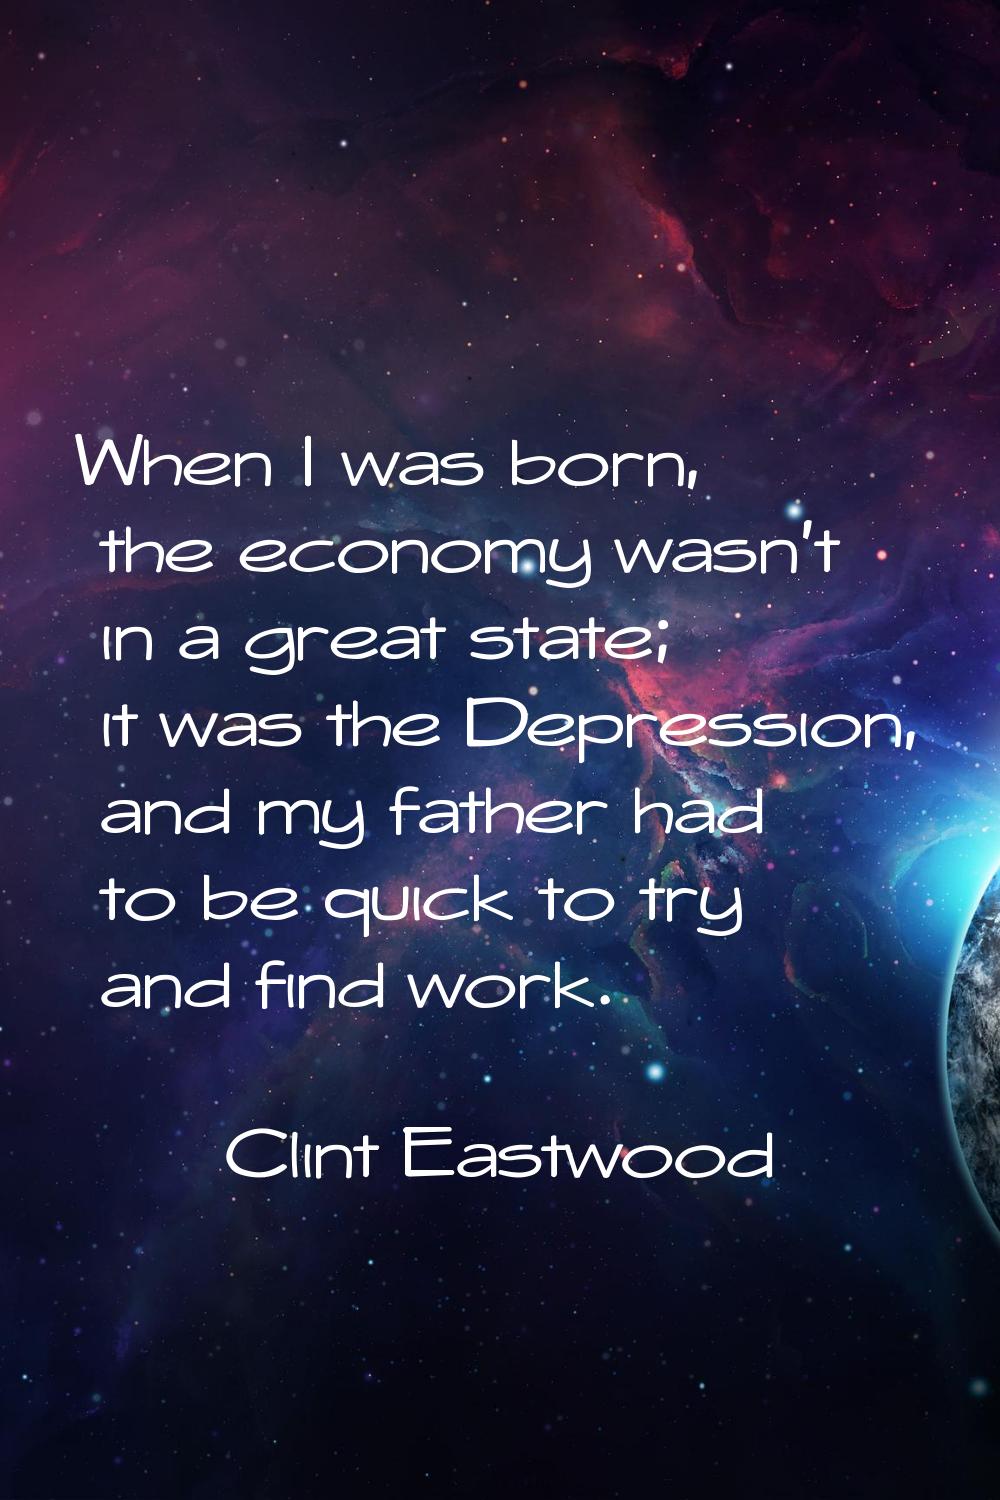 When I was born, the economy wasn't in a great state; it was the Depression, and my father had to b